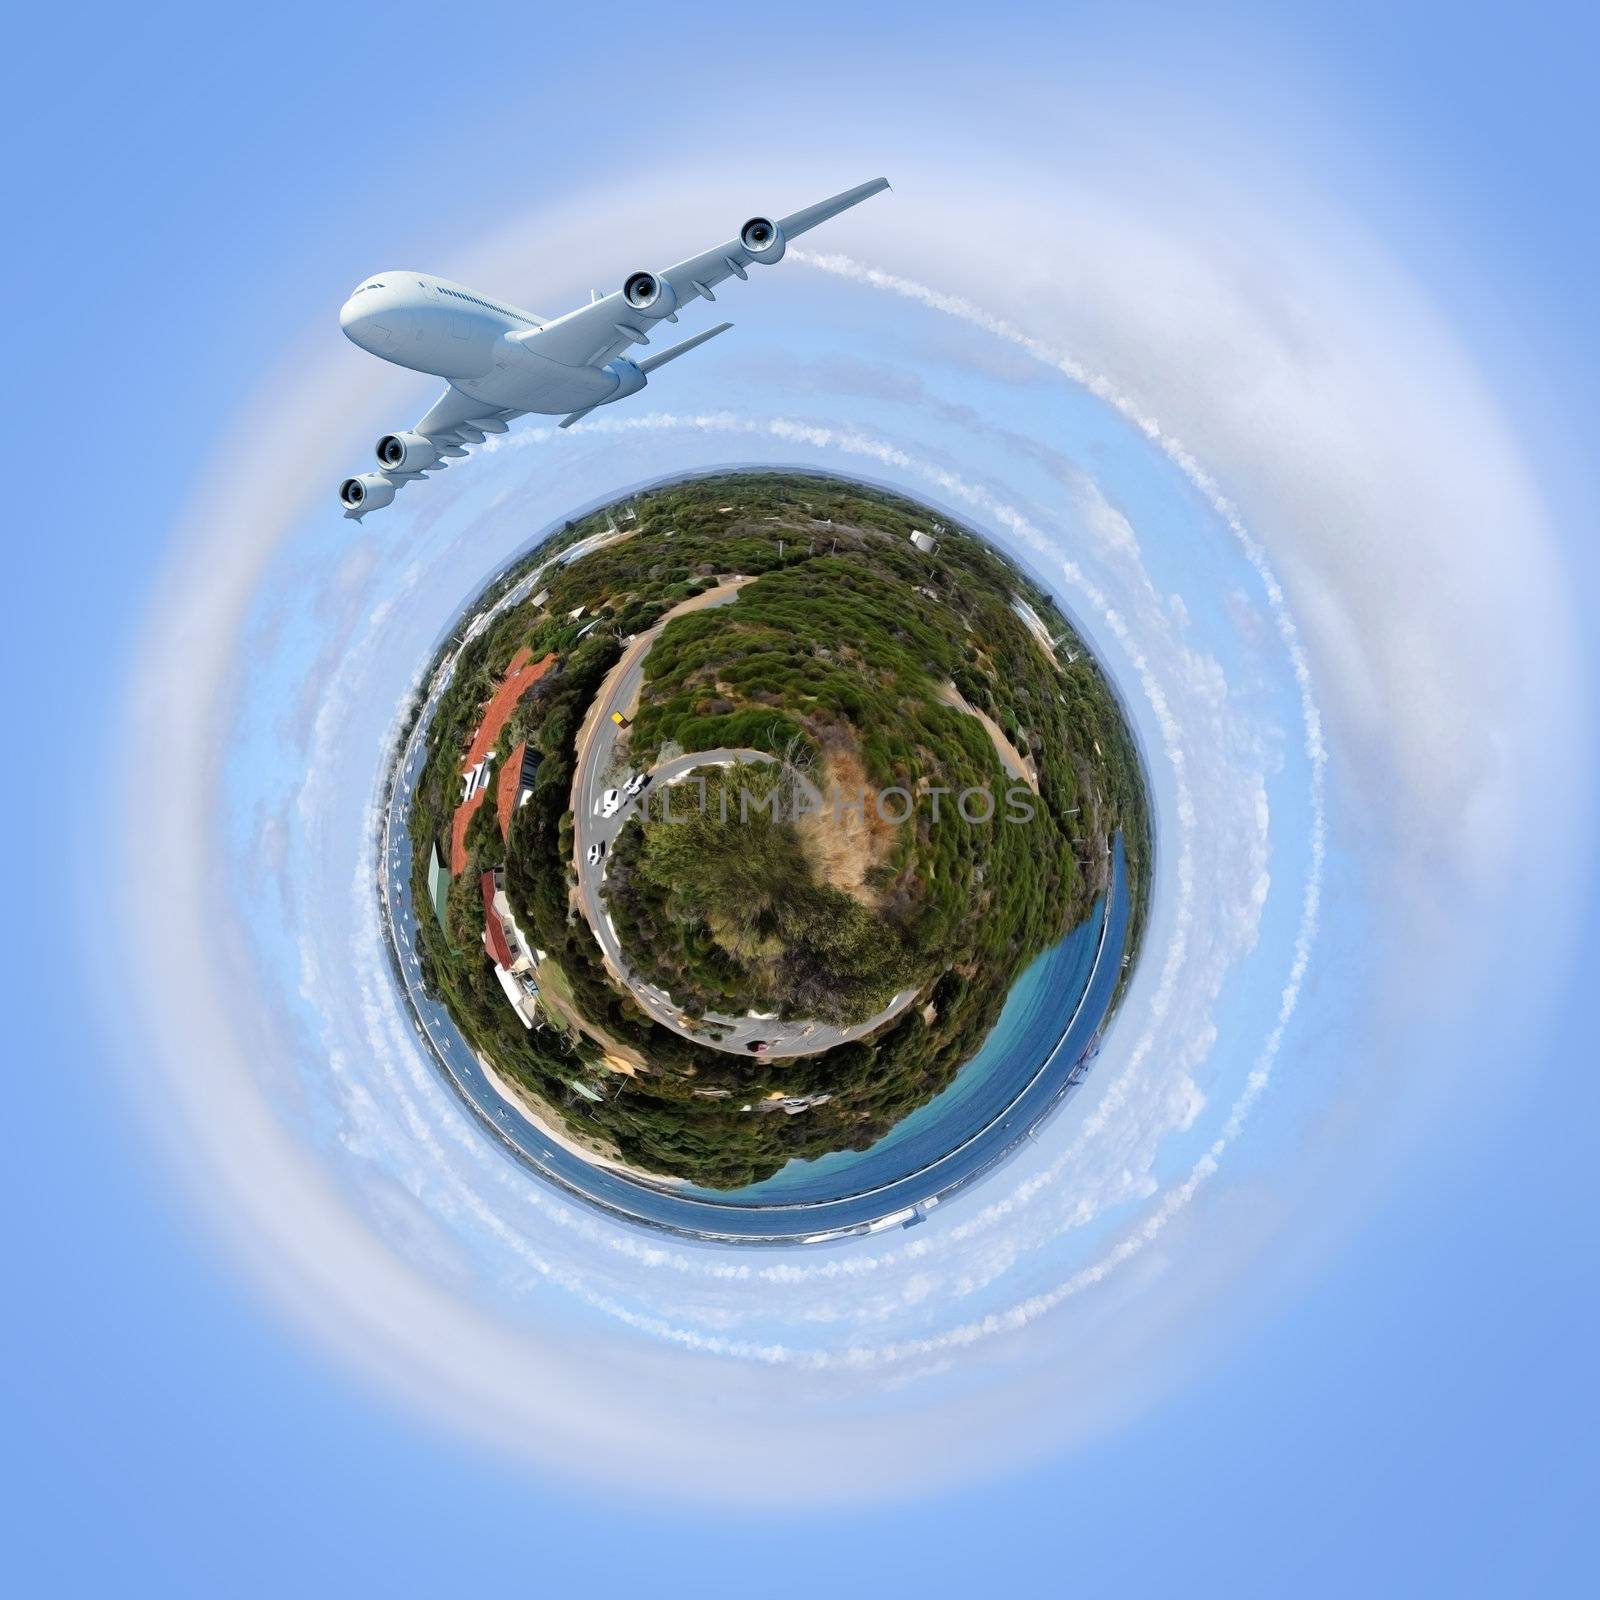 Planet earth against sky background and plane flying around it